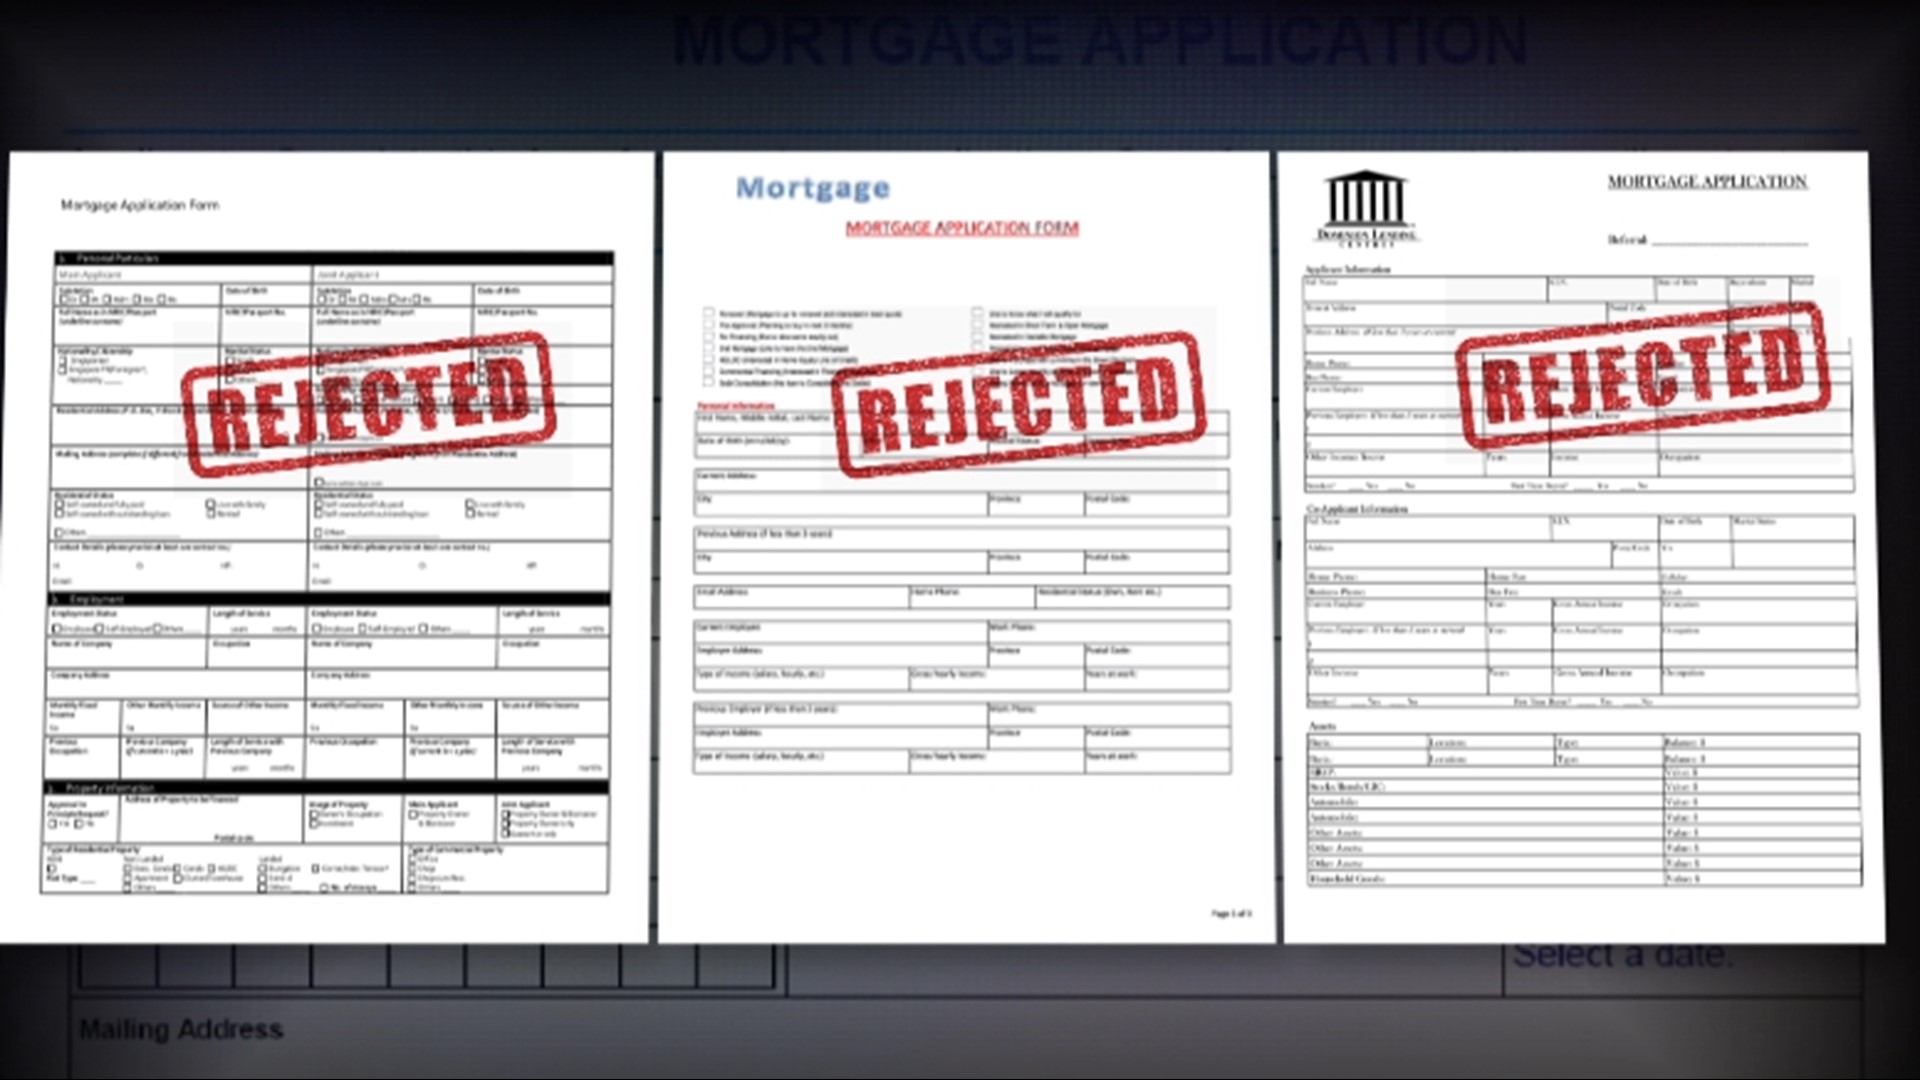 Data analyzed by KARE 11 shows the mortgage approval gap persists even when Black applicants have similar qualifications as white applicants.